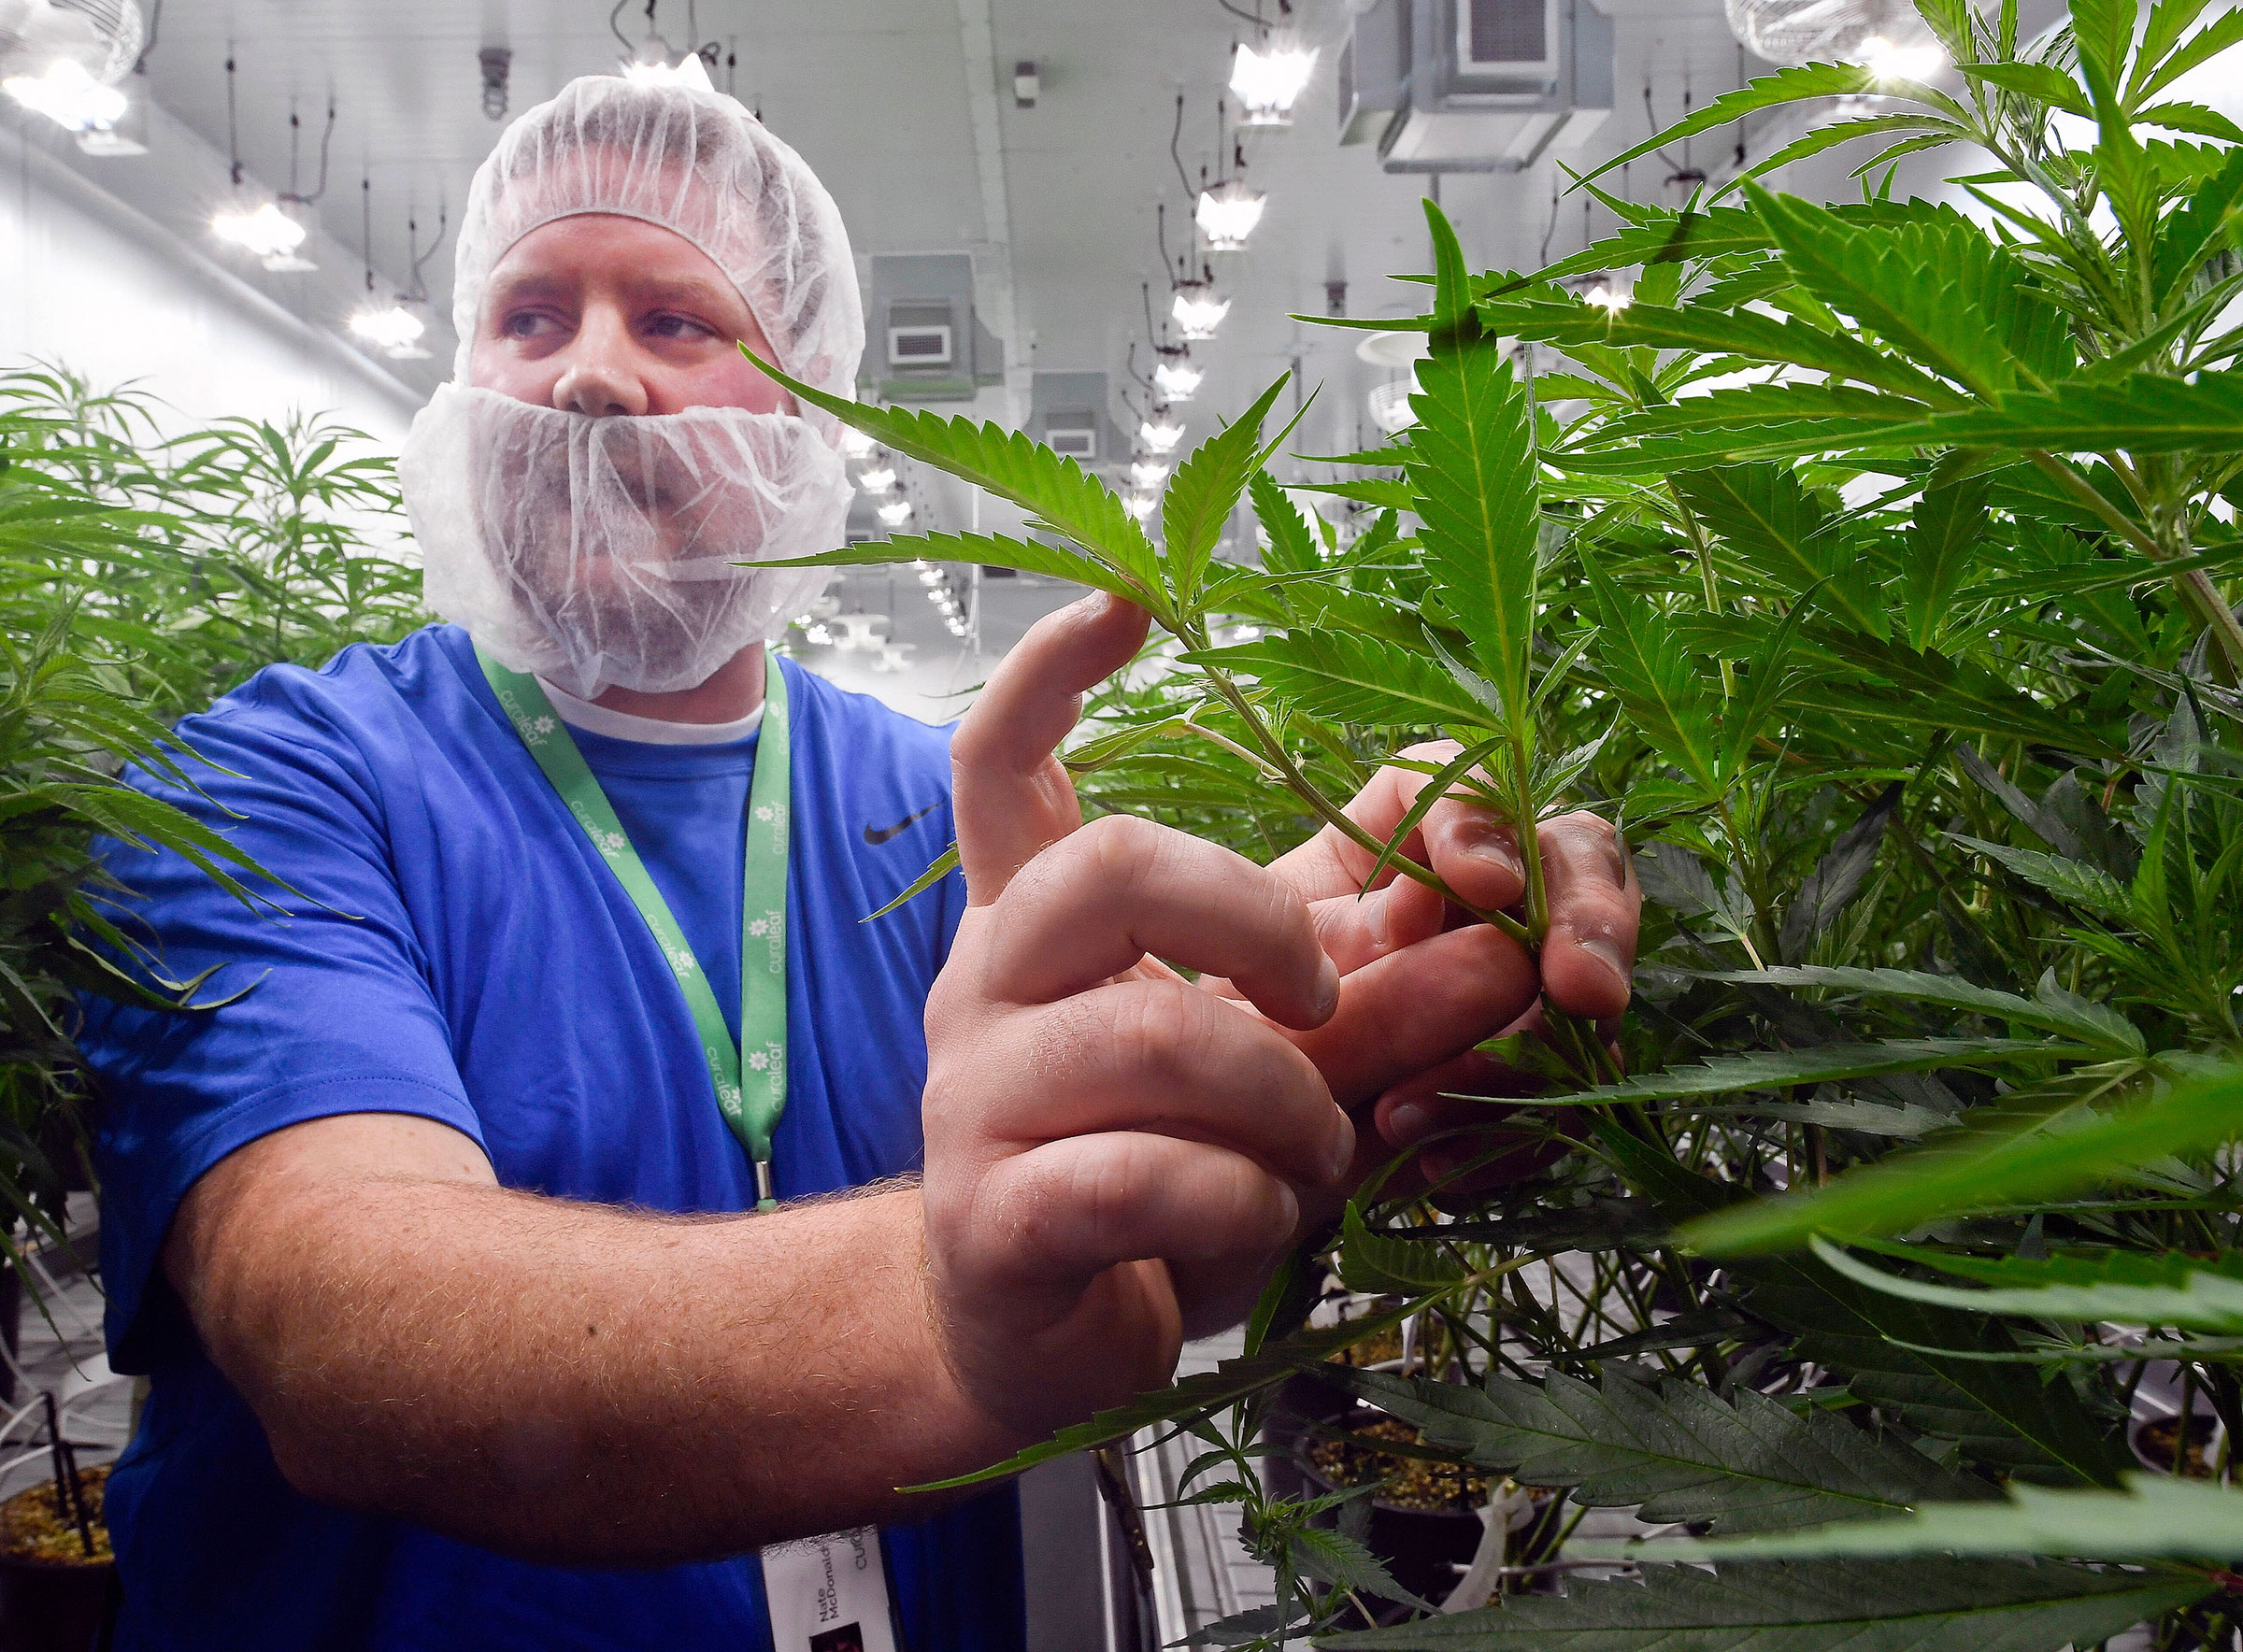 Nate McDonald, Curaleaf vice president of operations management, at the company's medical cannabis cultivation and processing facility, in Ravena, N.Y. on Aug. 22, 2019. (Hans Pennink—AP)